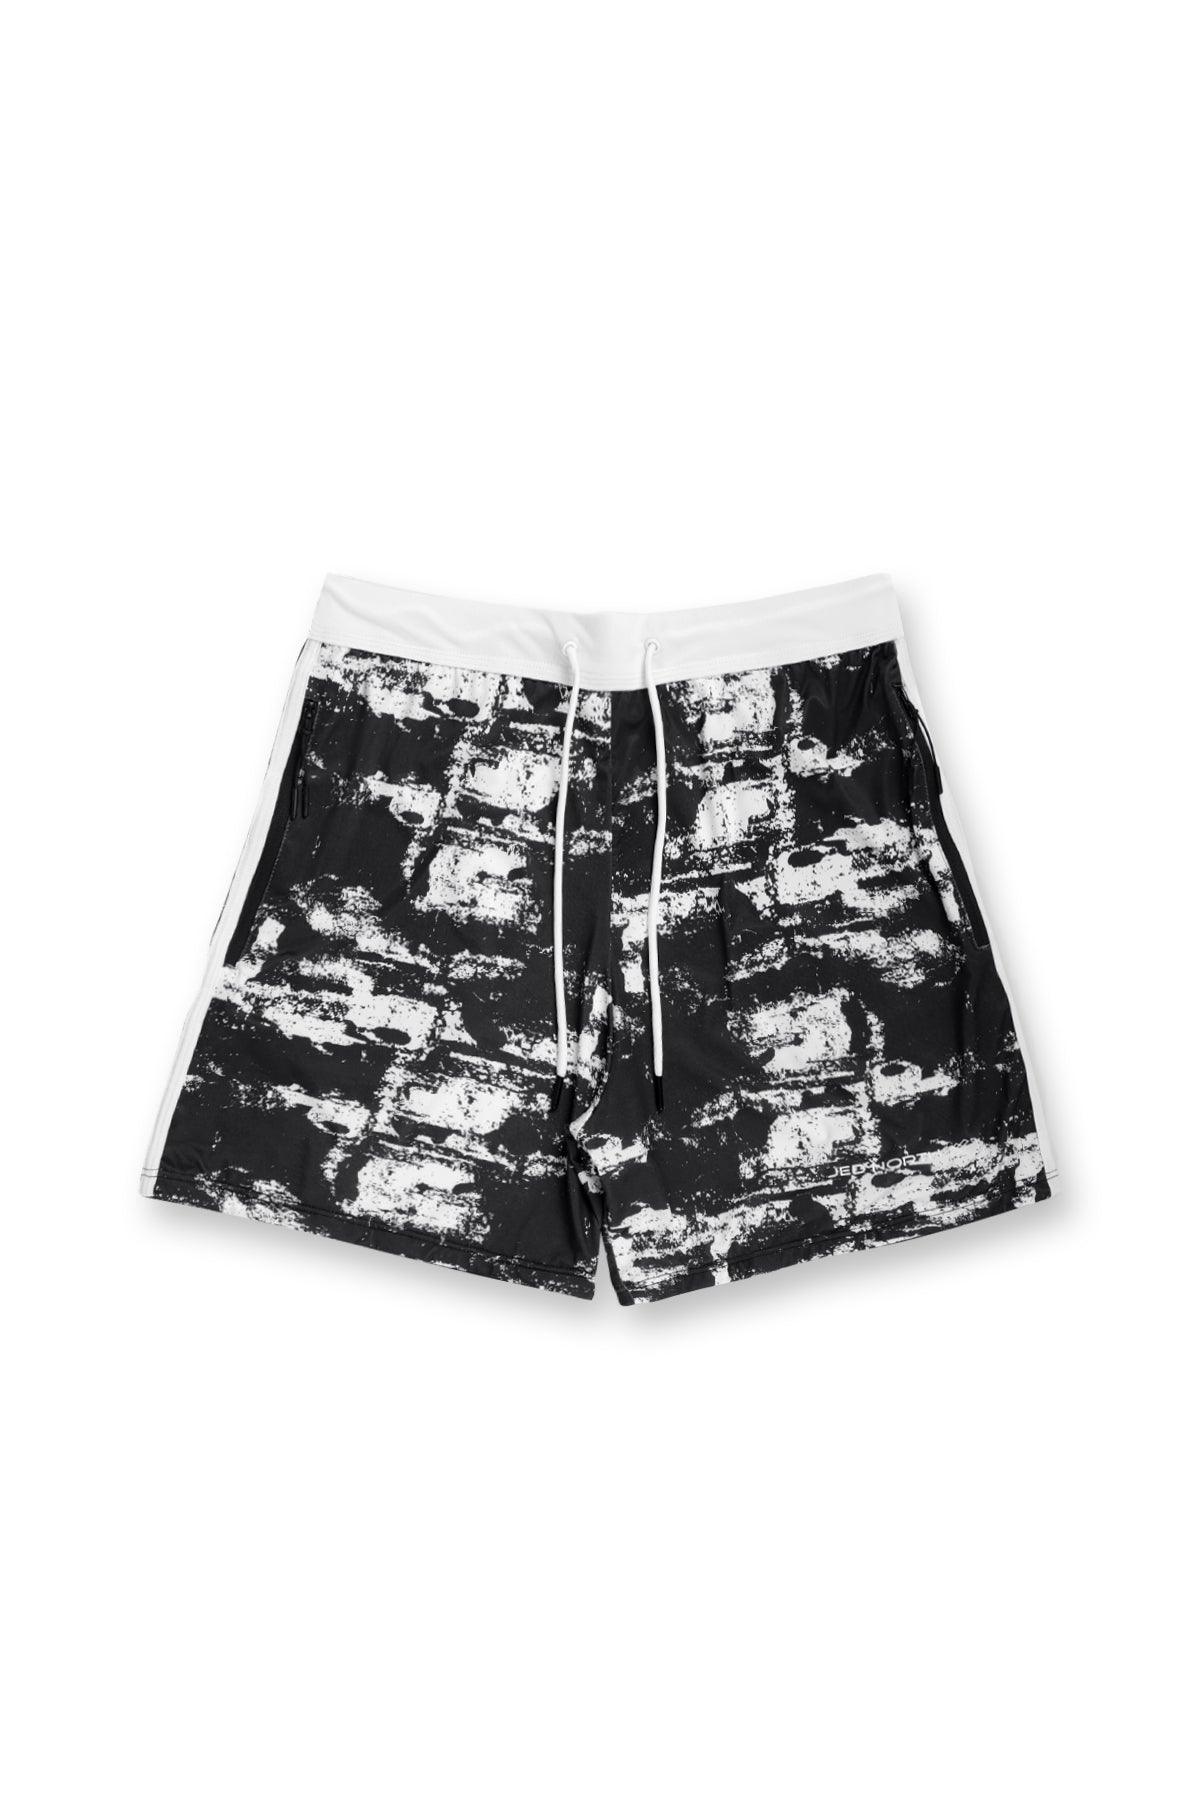 Ace Graphic Casual 5" Shorts 2.0 - Black Brush - Jed North